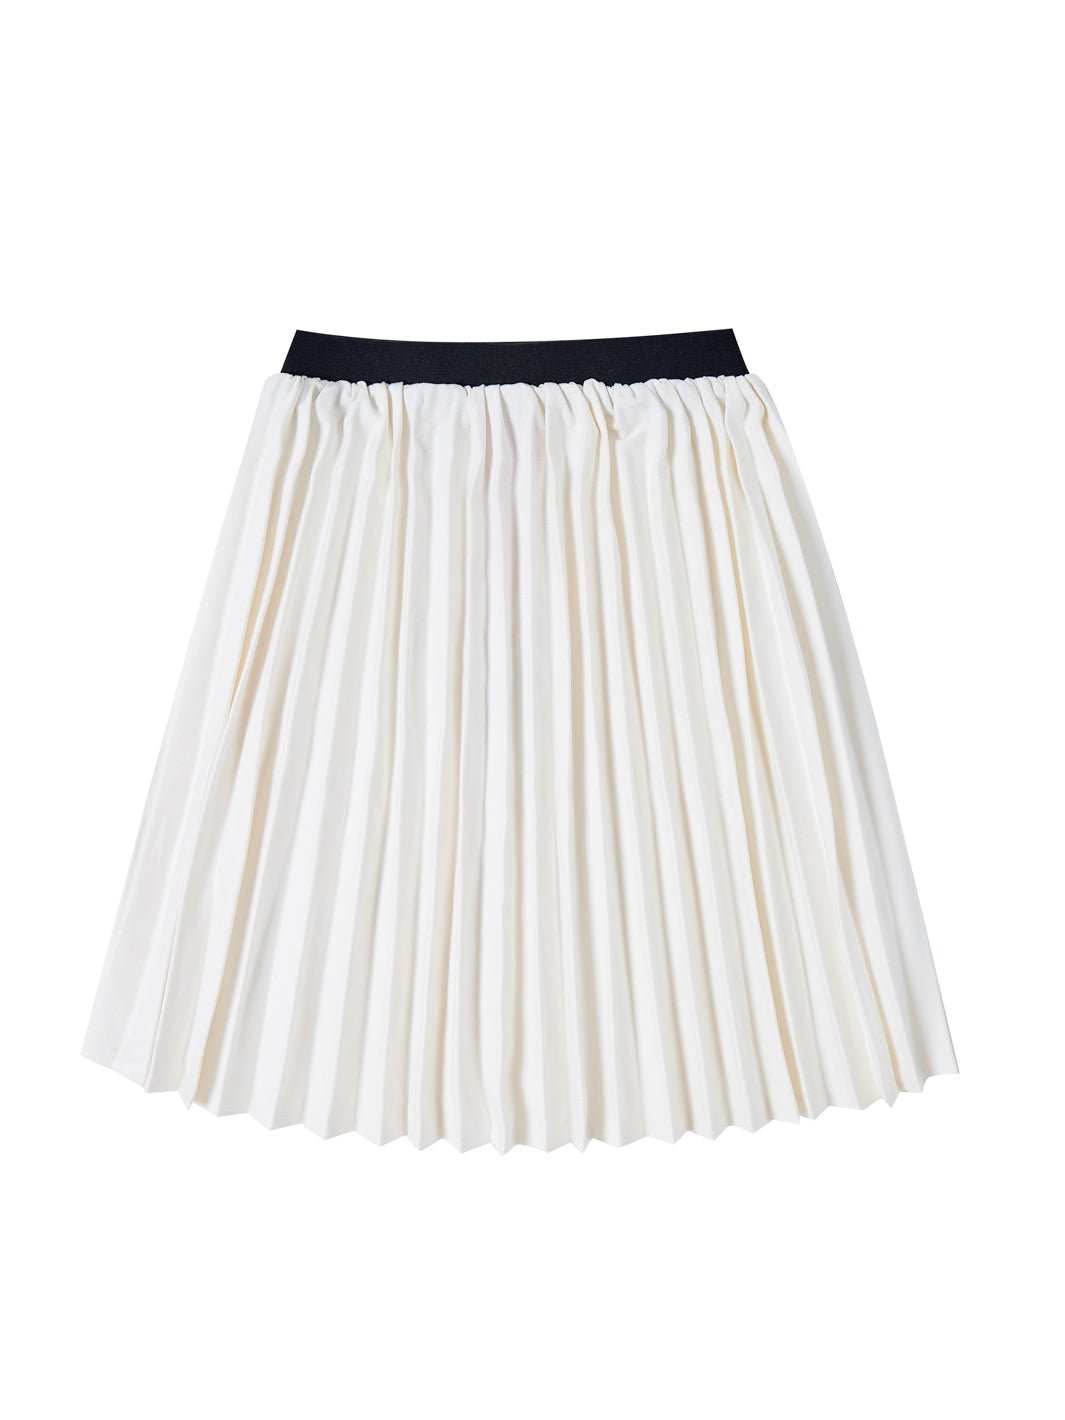 Brushed Accordion Pleated Skirt - Off White